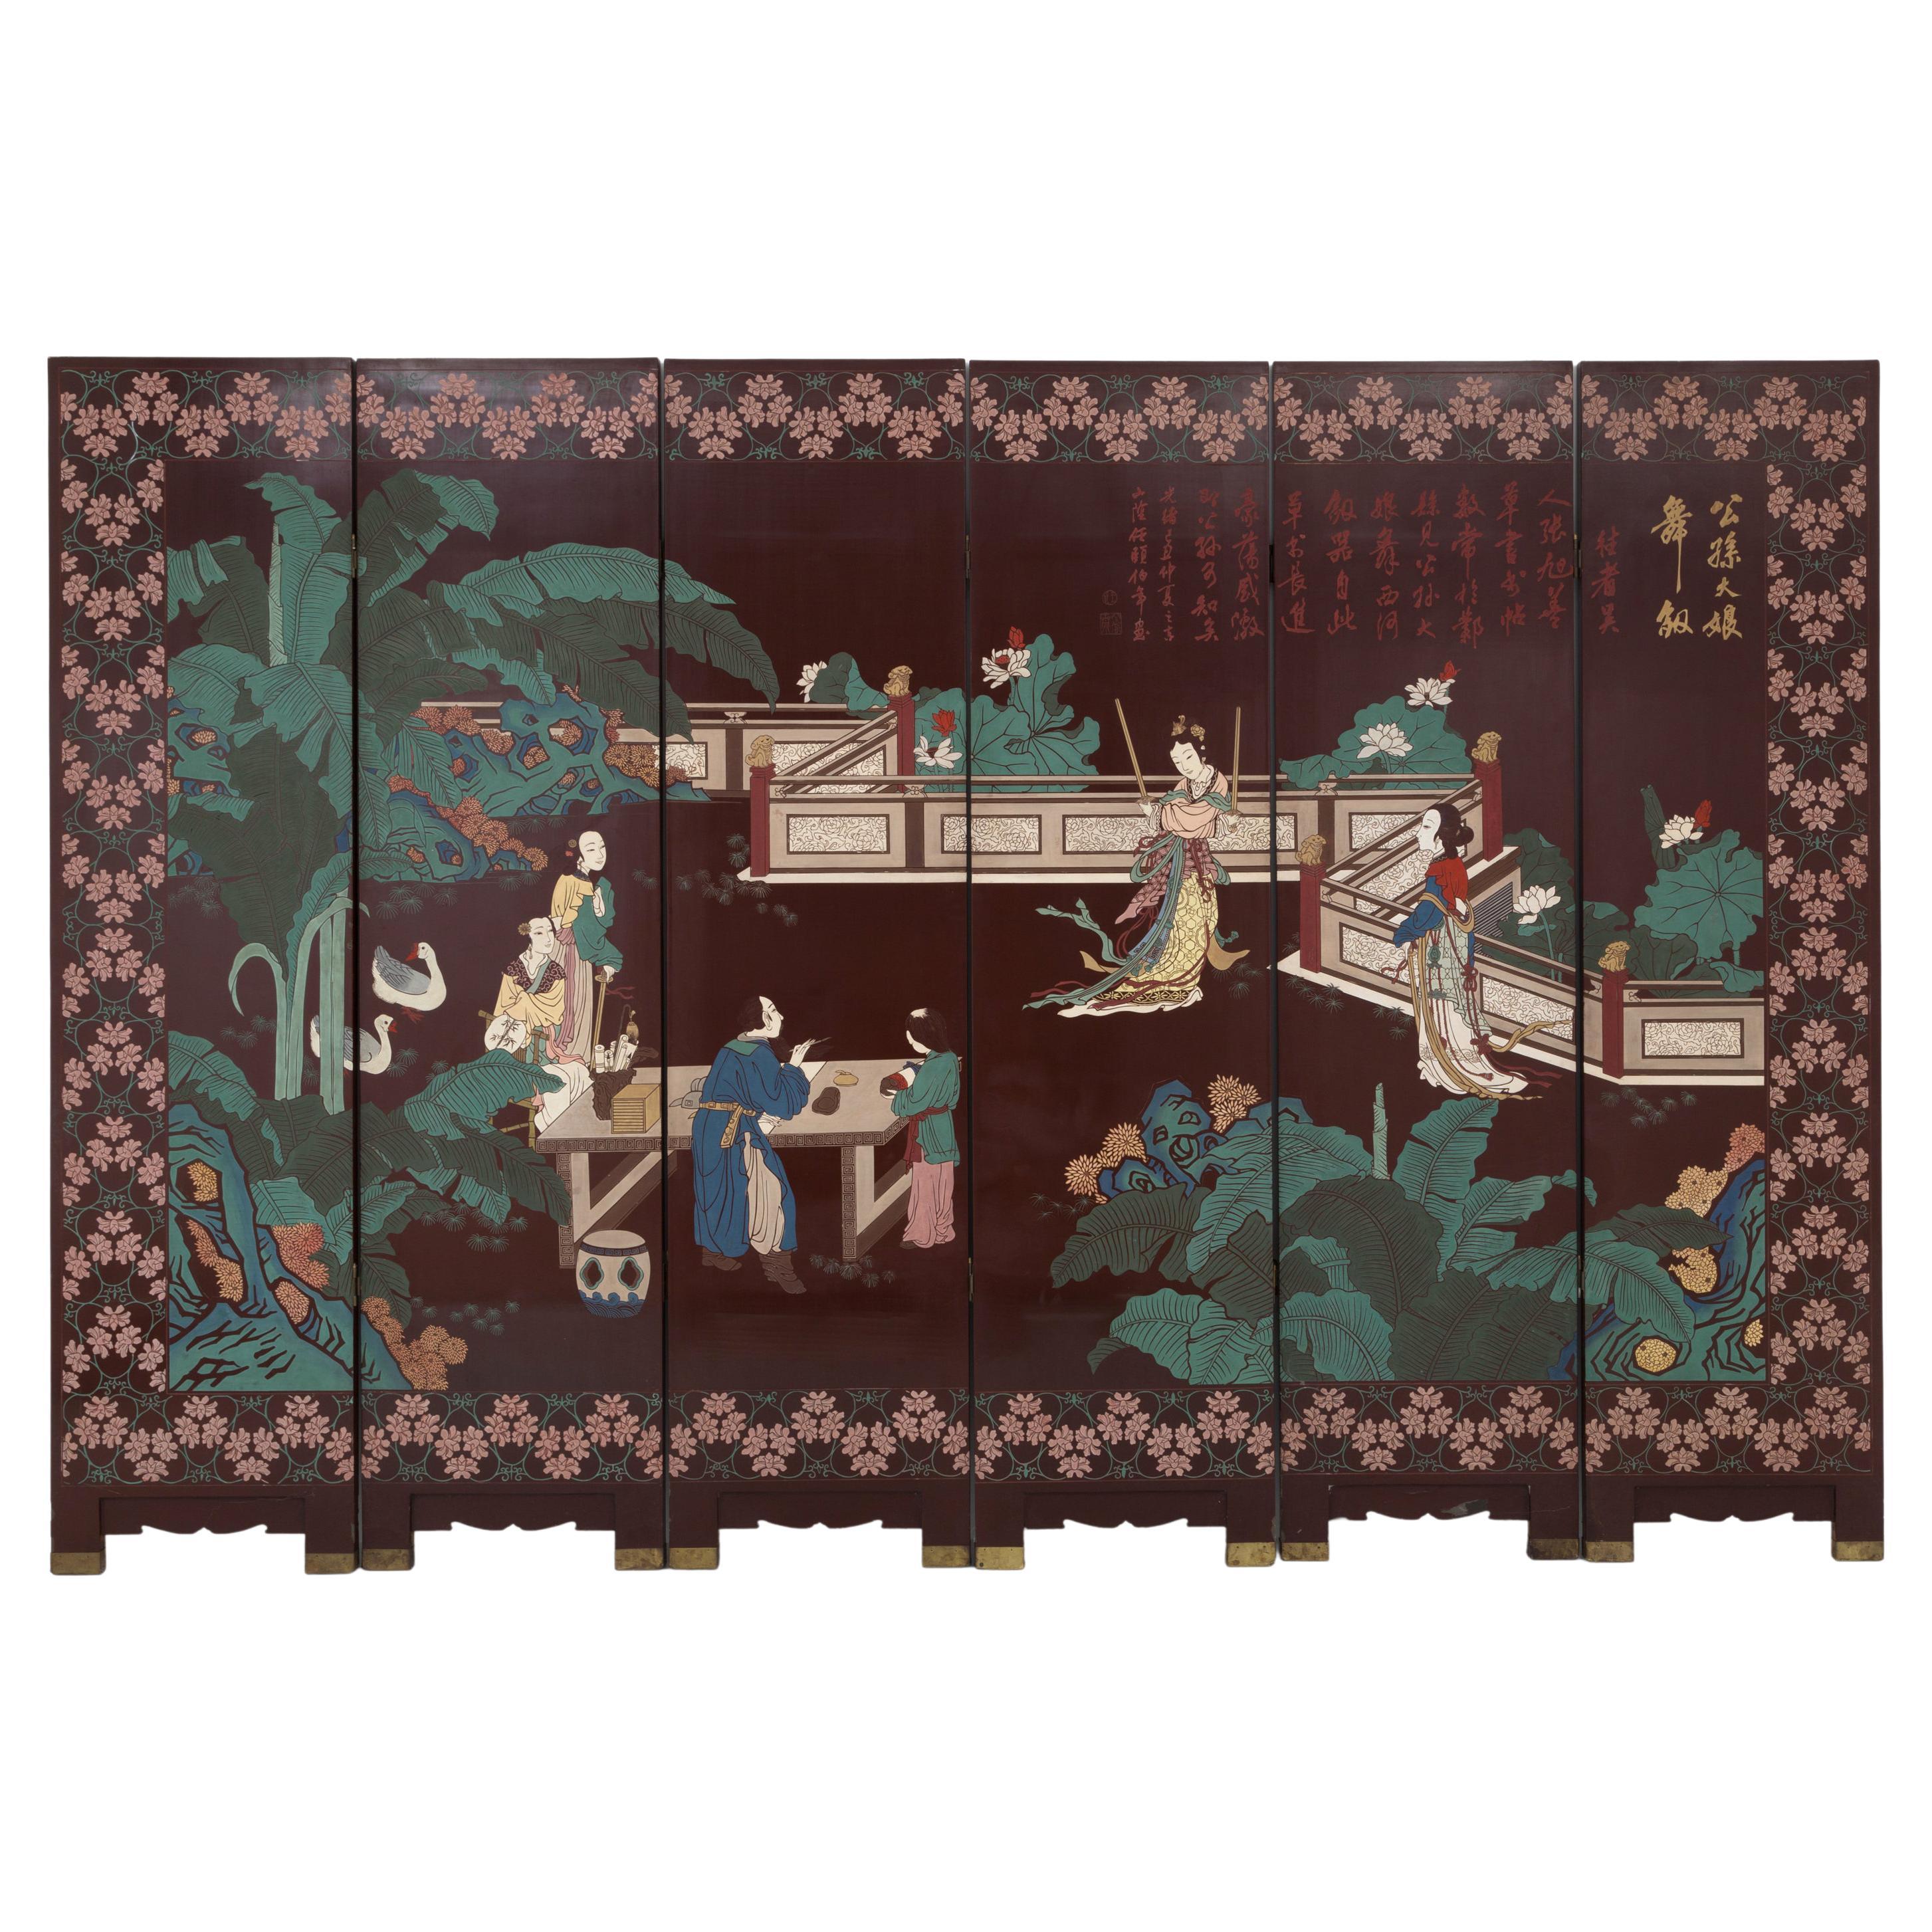 Chinese Wooden Screen Depicting Scenes of Oriental Life